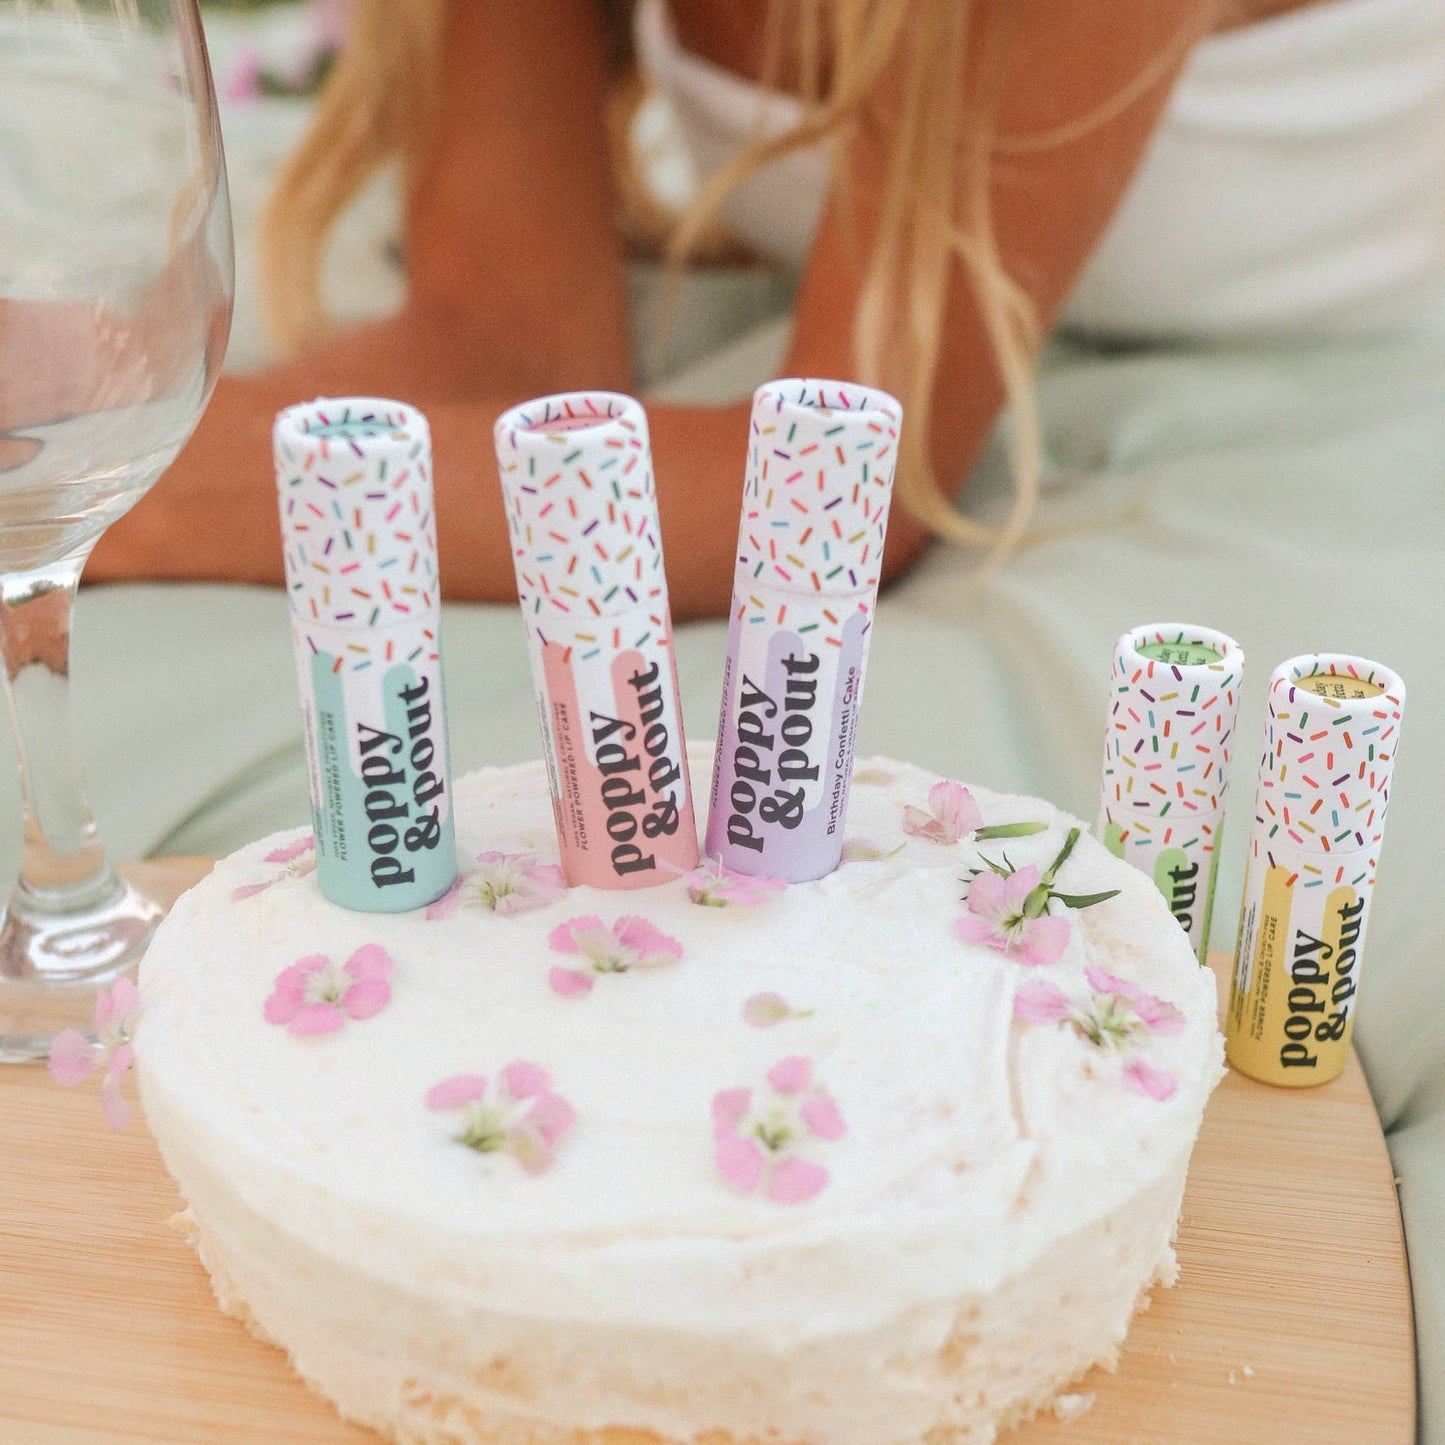 Poppy & Pout - Lip Balm, Birthday Confetti Cake, Pink  Poppy & Pout   -better made easy-eco-friendly-sustainable-gifting